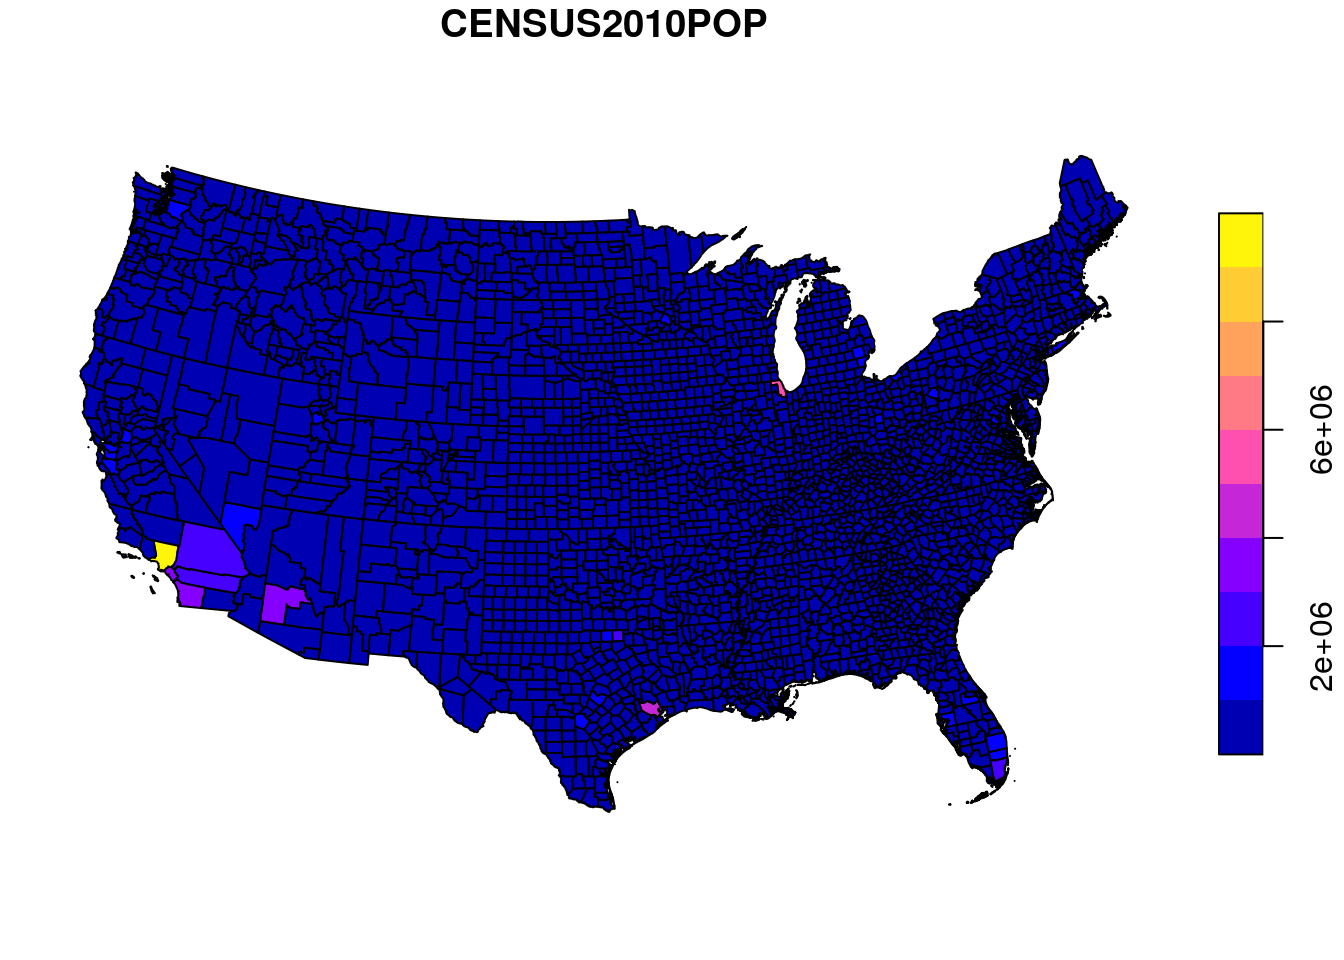 Population size per county in the US (equal breaks)